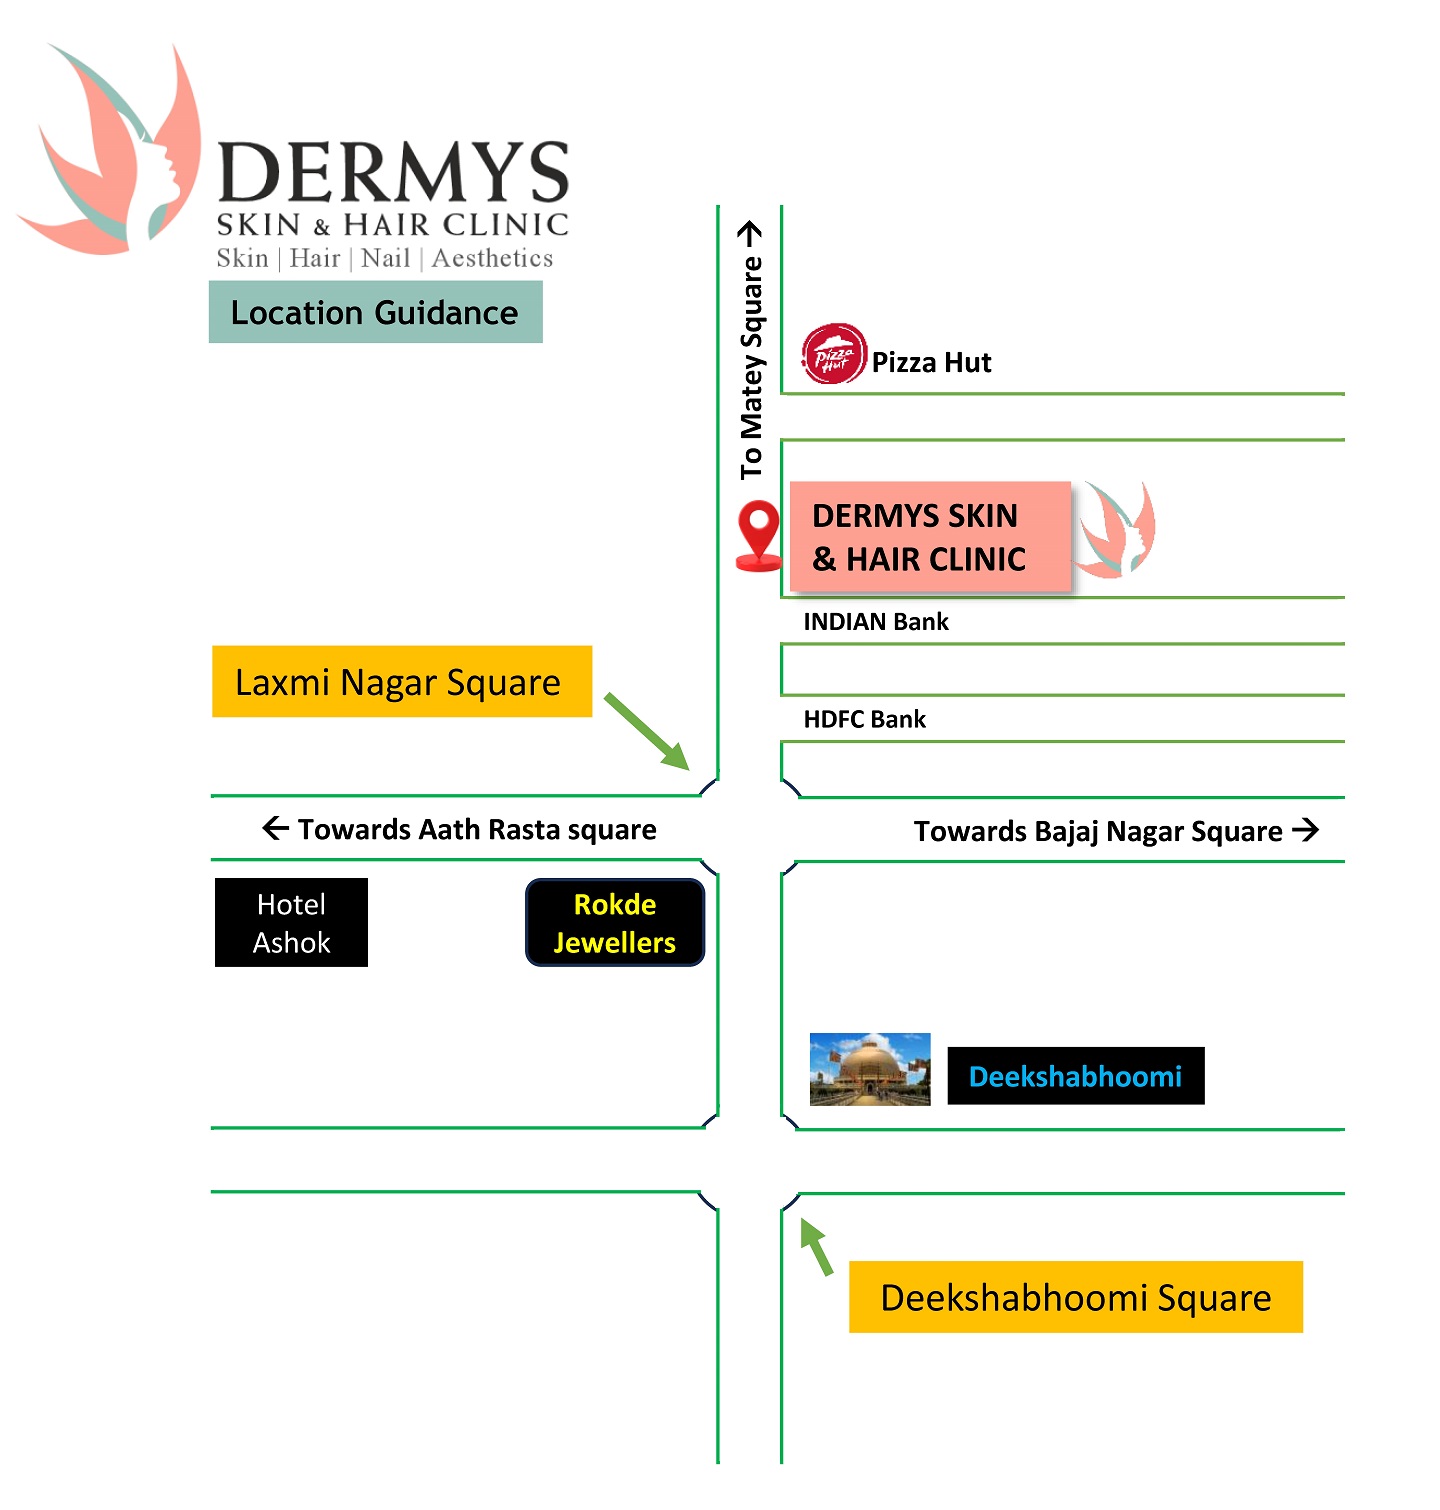 Image showing directions & How to reach Dermys Skin and Hair Clinic Nagpur